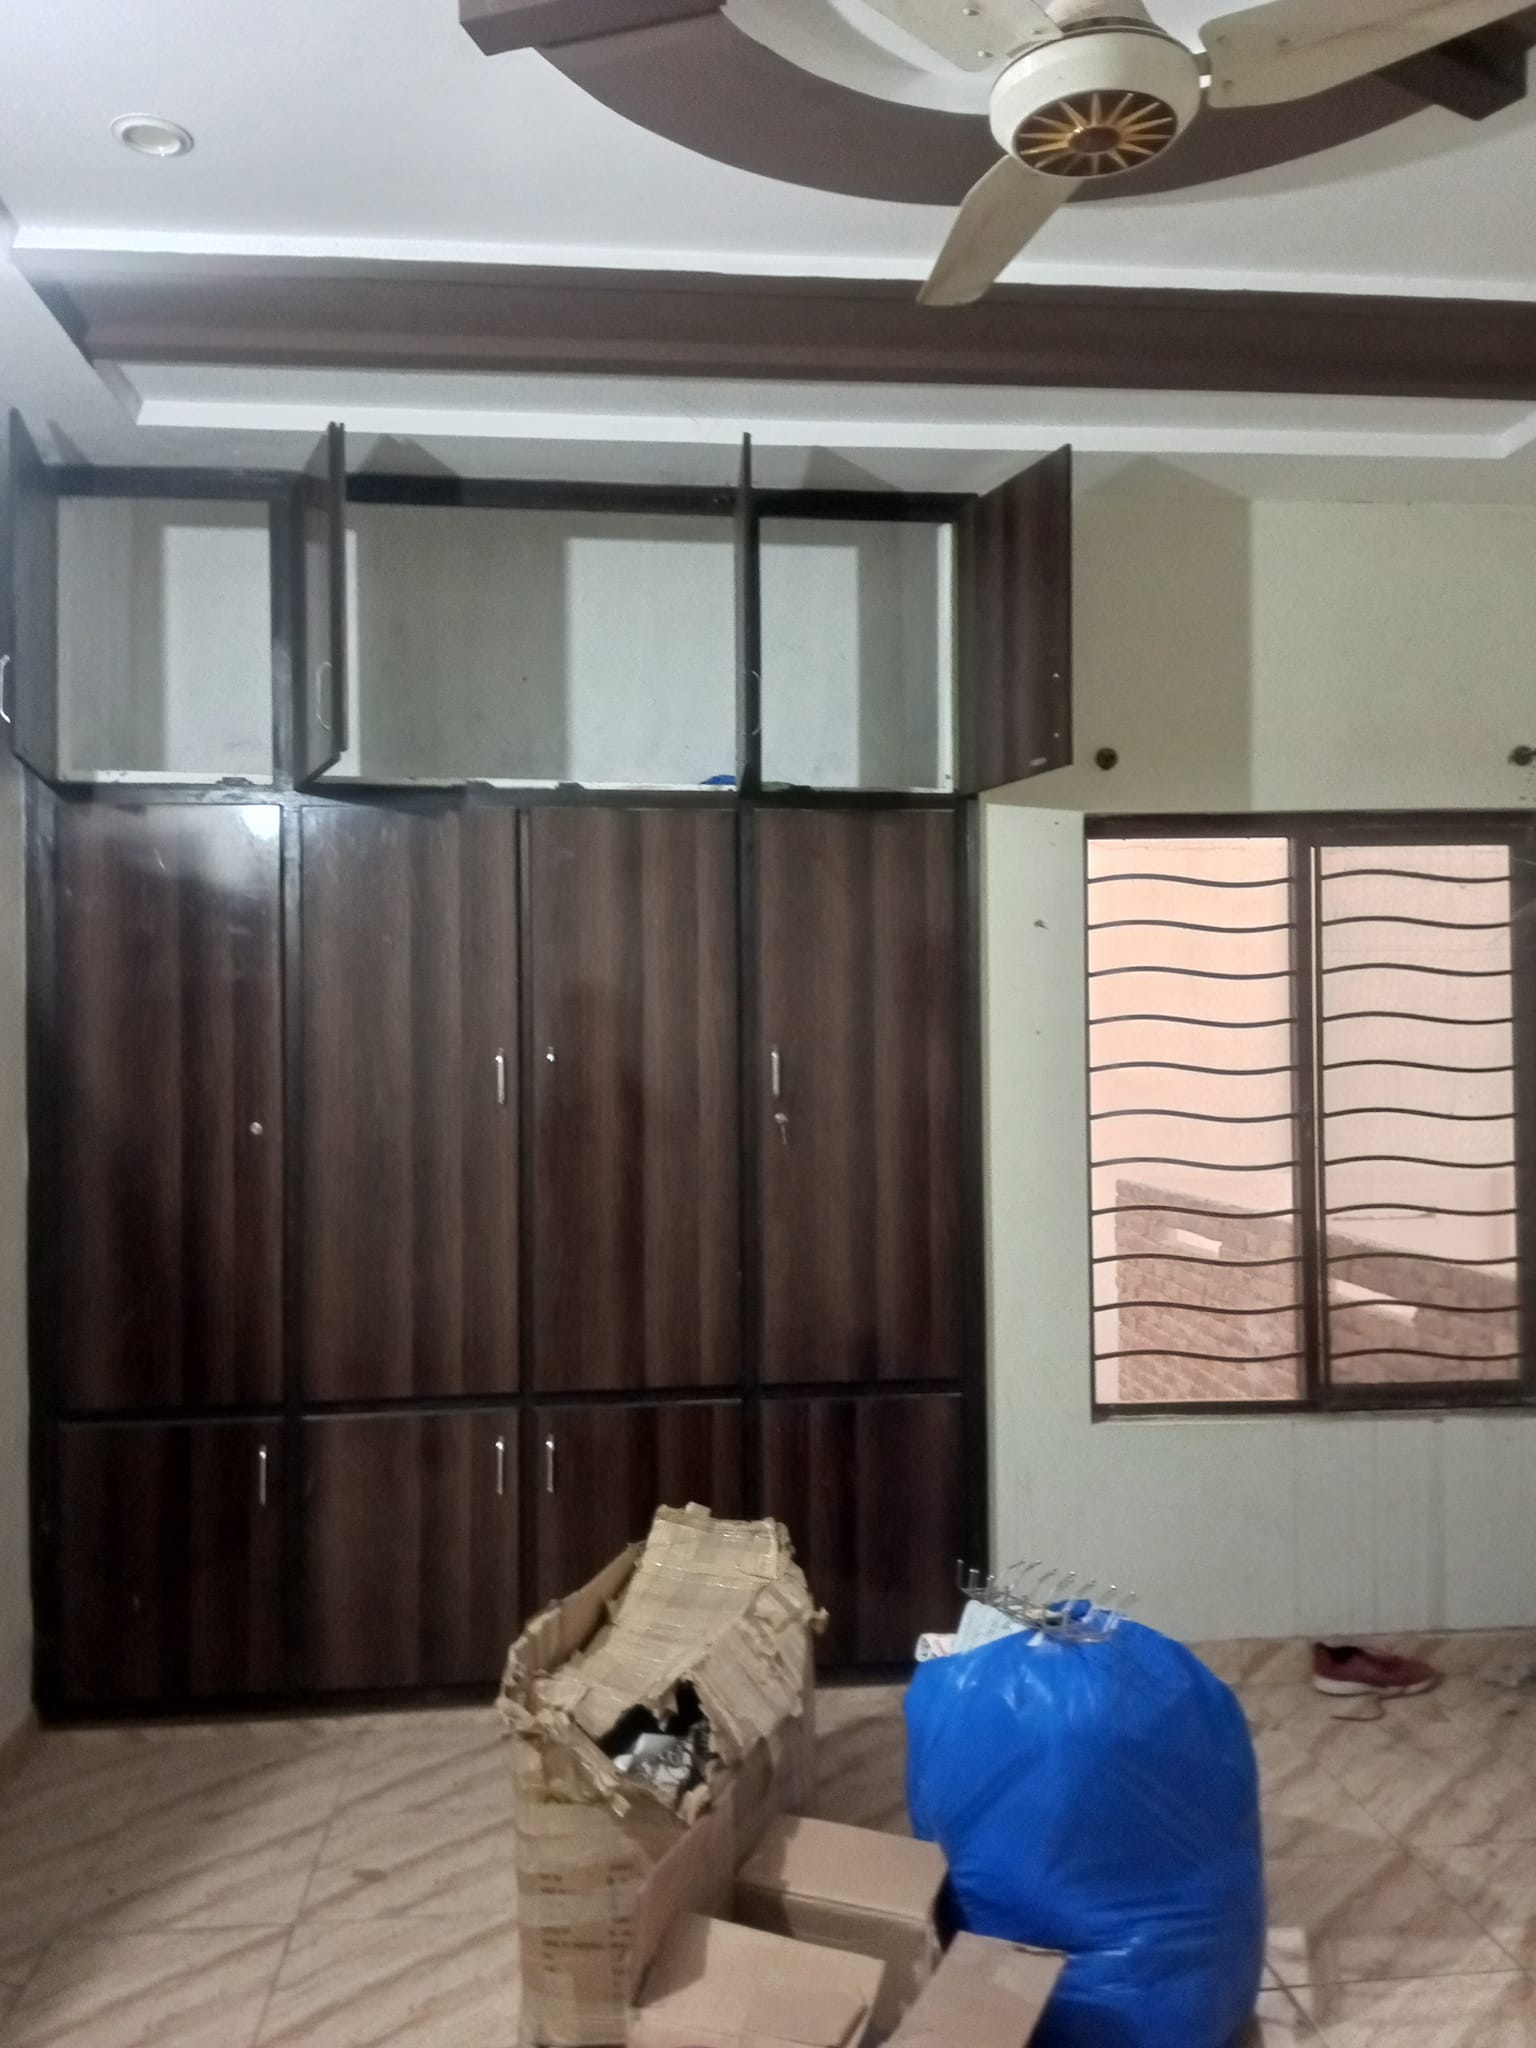 5 Marla House For Rent in Shalimar colony Multan